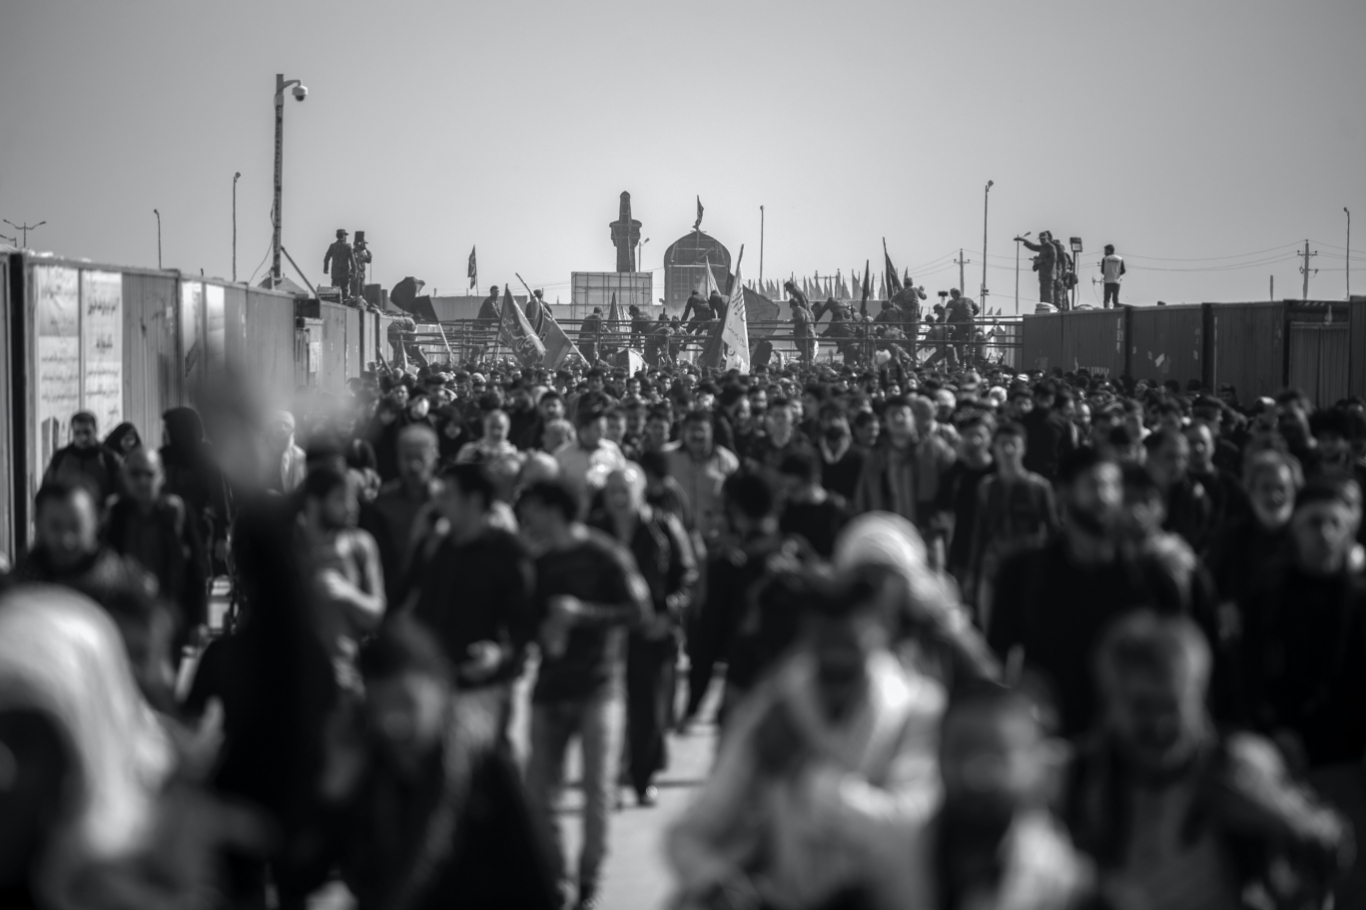 A crowd moving about on a street with a black and white filter.